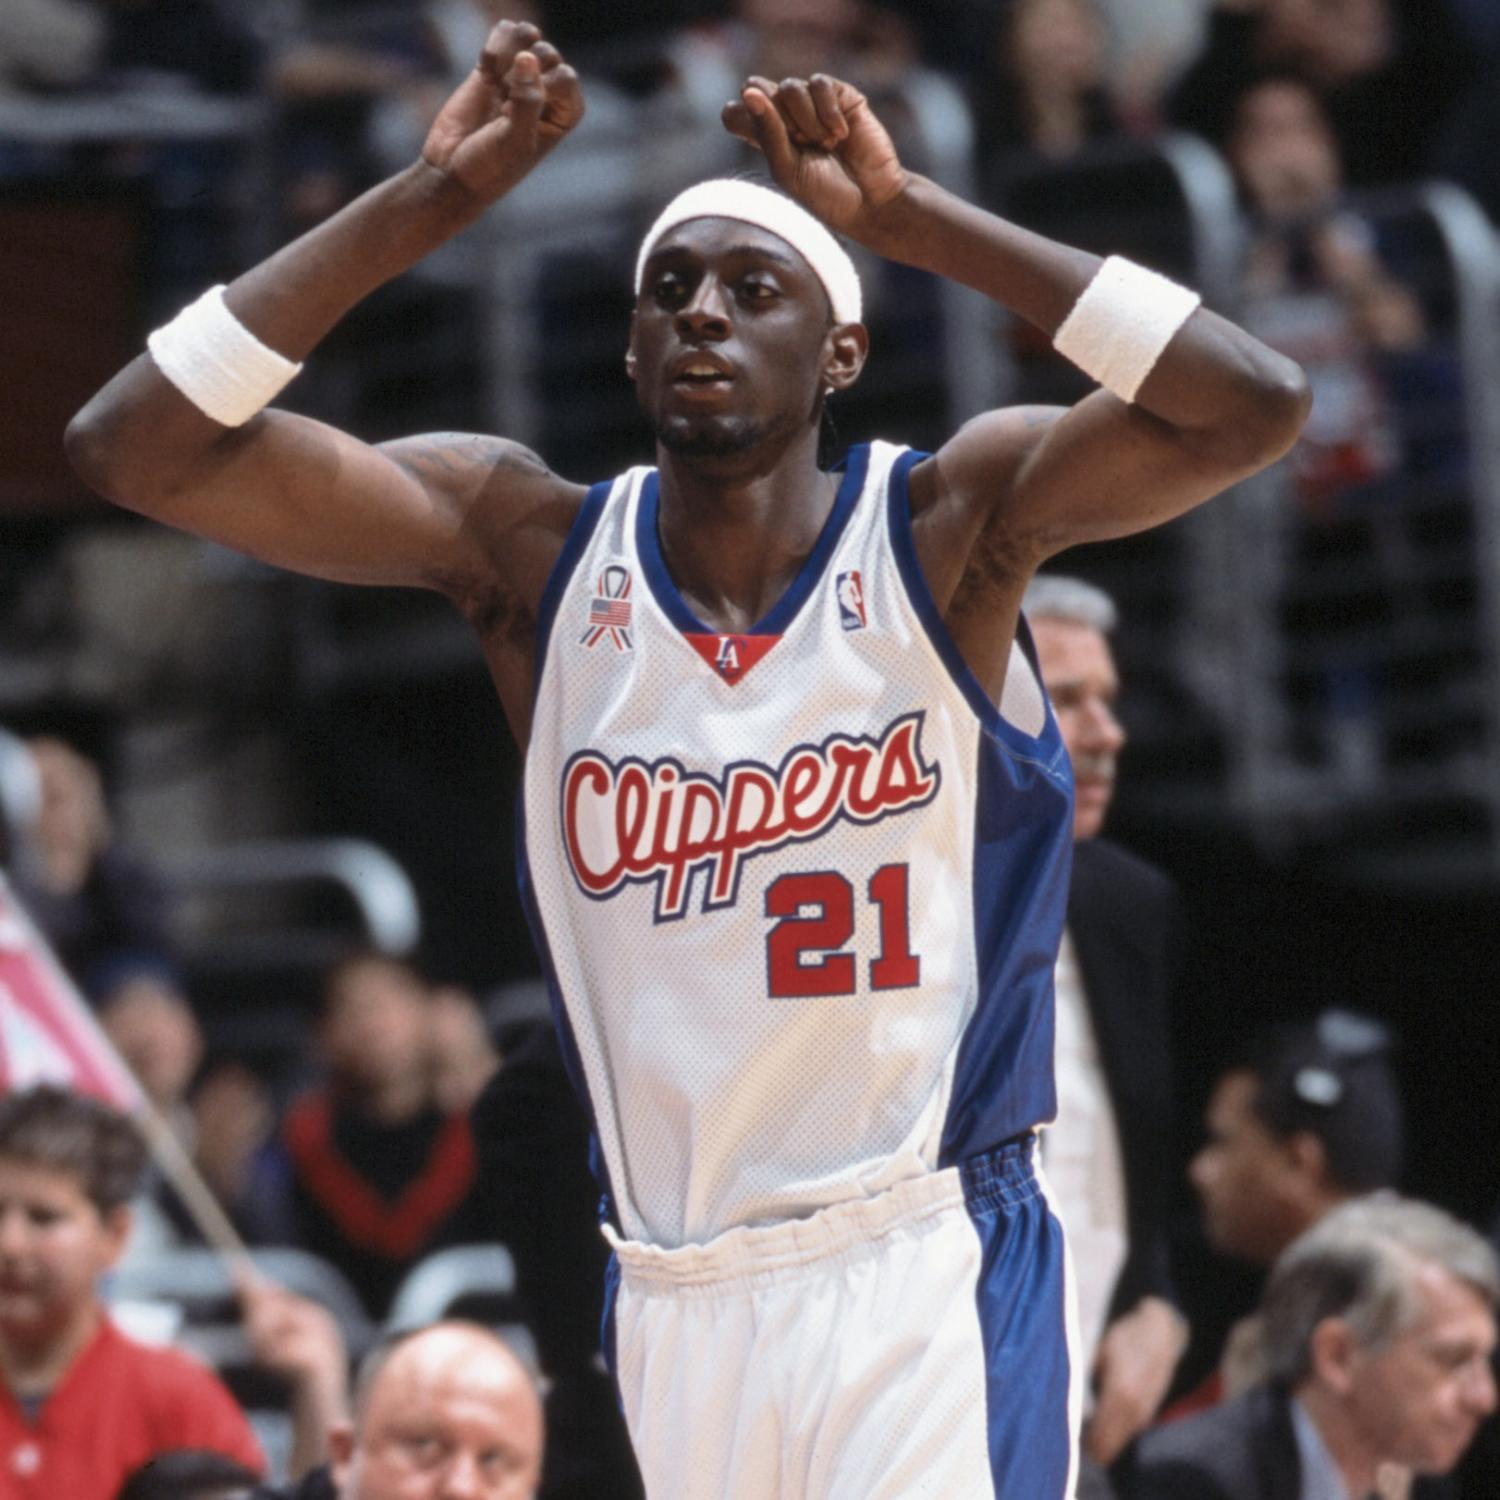 People Mistakenly Think Darius Miles Returned to the NBA